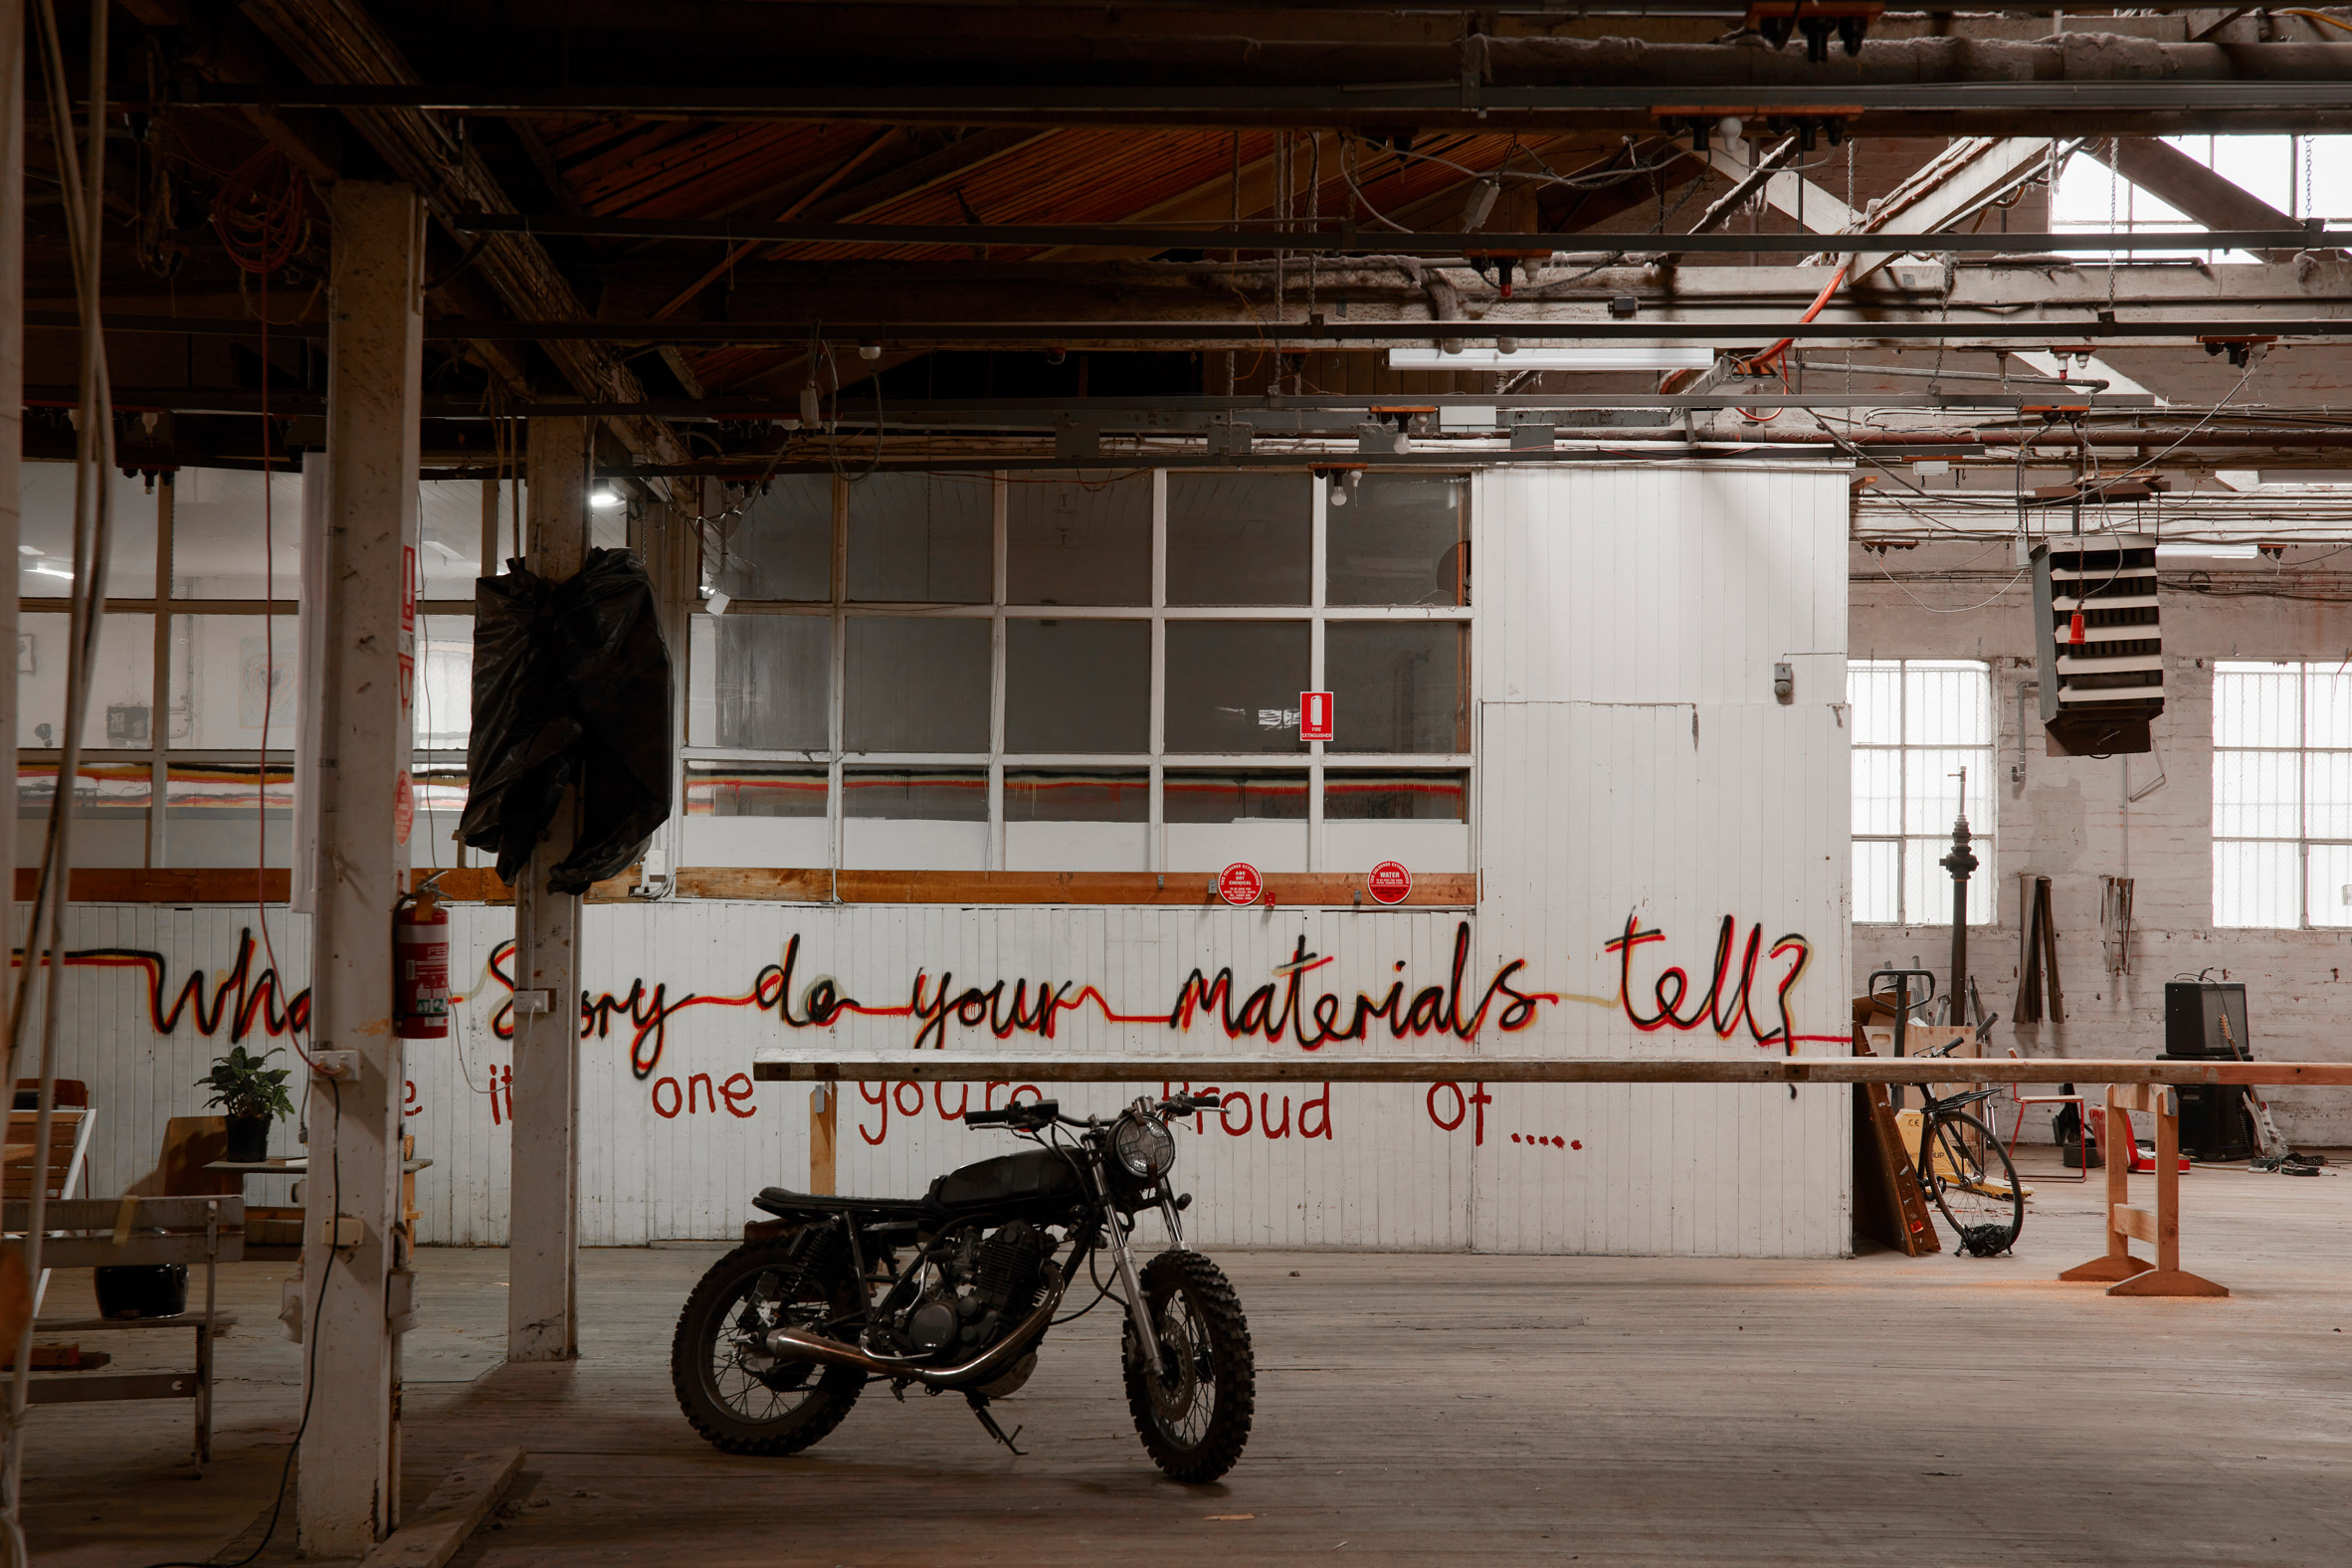 Inside the Zero Footprint Repurposing Hub warehouse where 'what story do your materials tell?' has been spray-painted on one wall